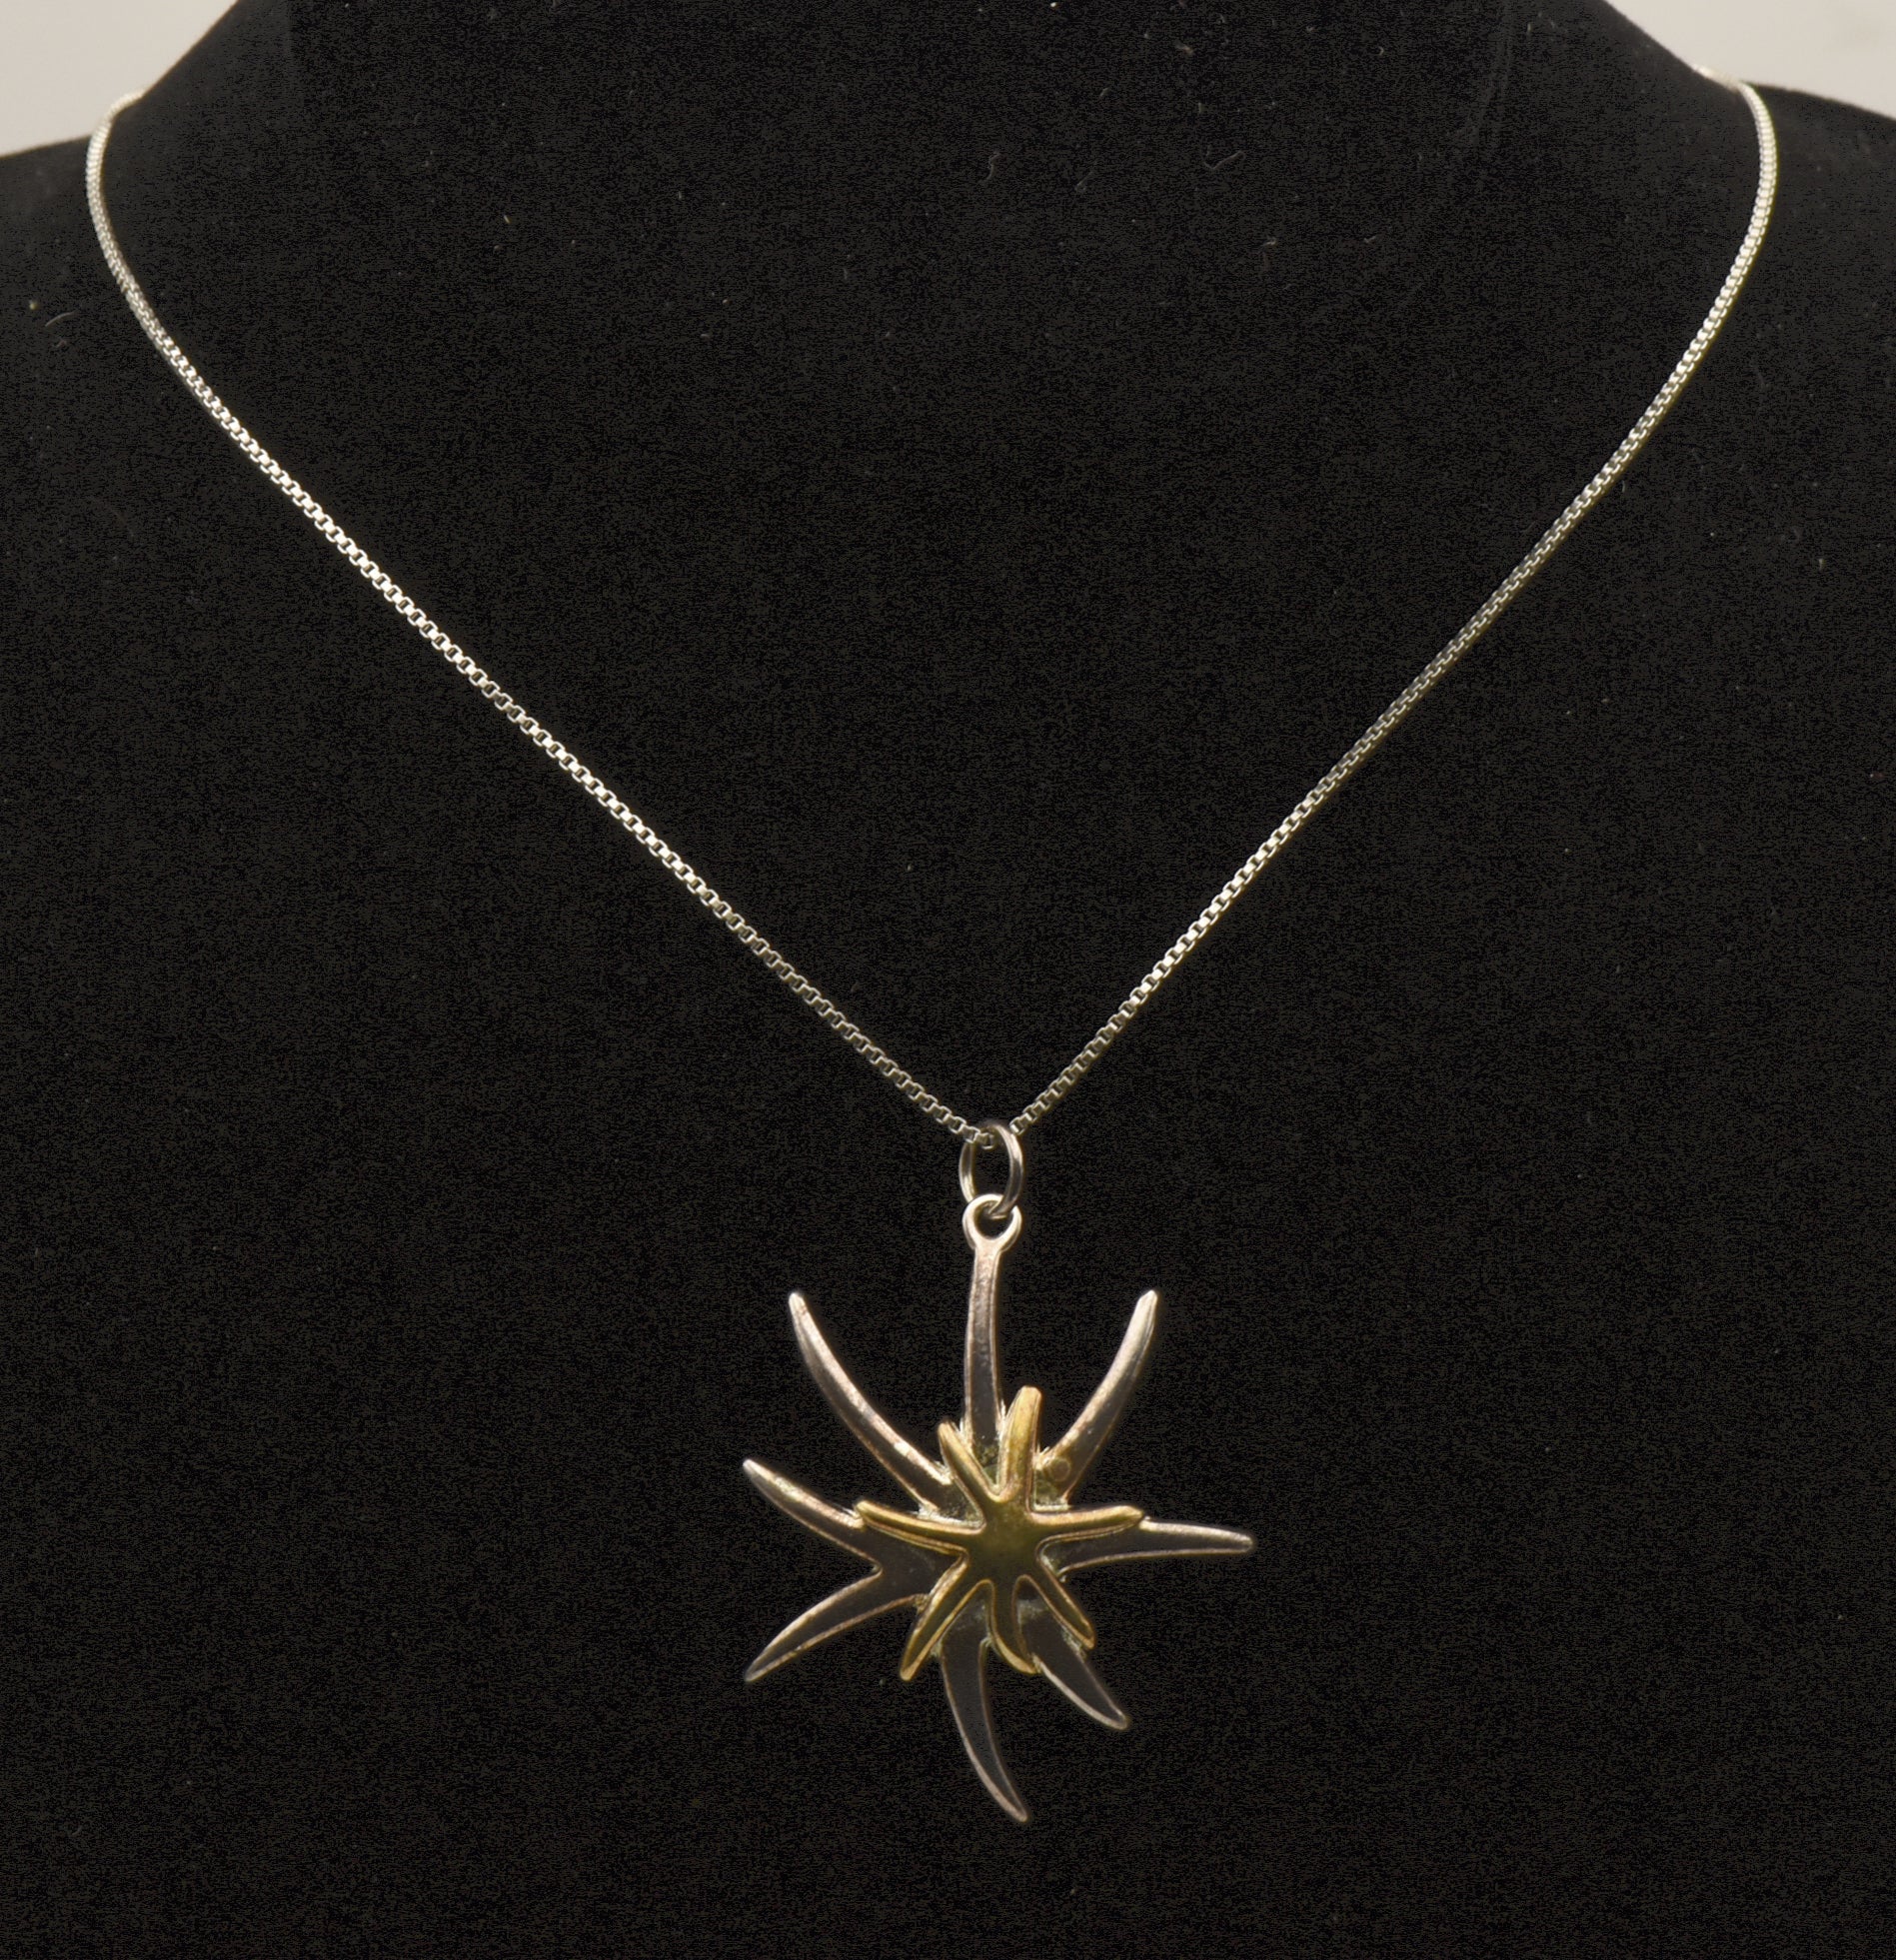 Vintage Sterling Silver and Gold Tone Starfish Pendant on Sterling Silver Chain Necklace - 17.75"